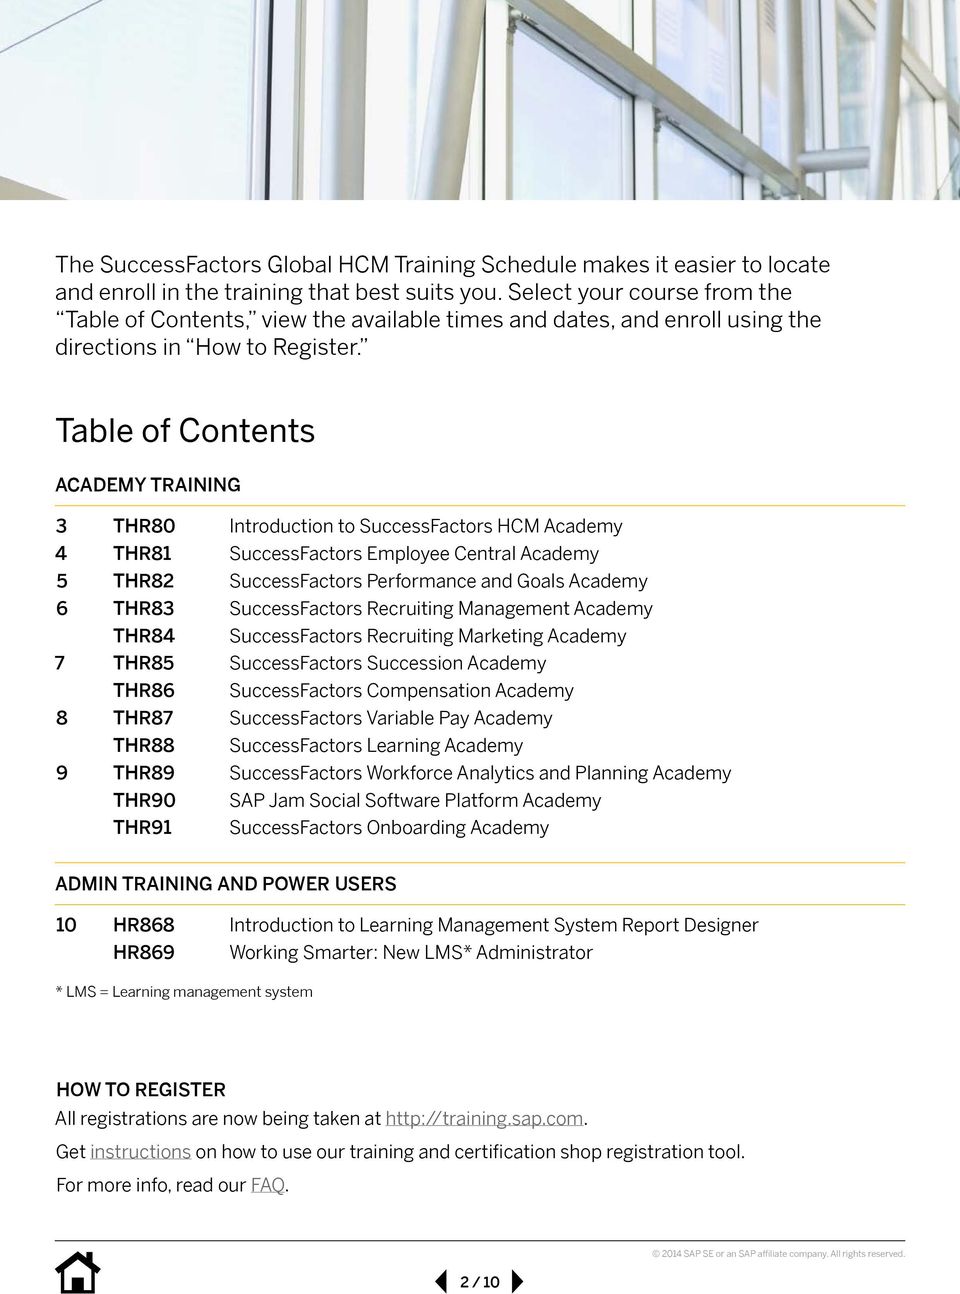 Table of Contents ACADEMY TRAINING 3 THR80 Introduction to SuccessFactors HCM Academy 4 THR81 SuccessFactors Employee Central Academy 5 THR82 SuccessFactors Performance and Goals Academy 6 THR83